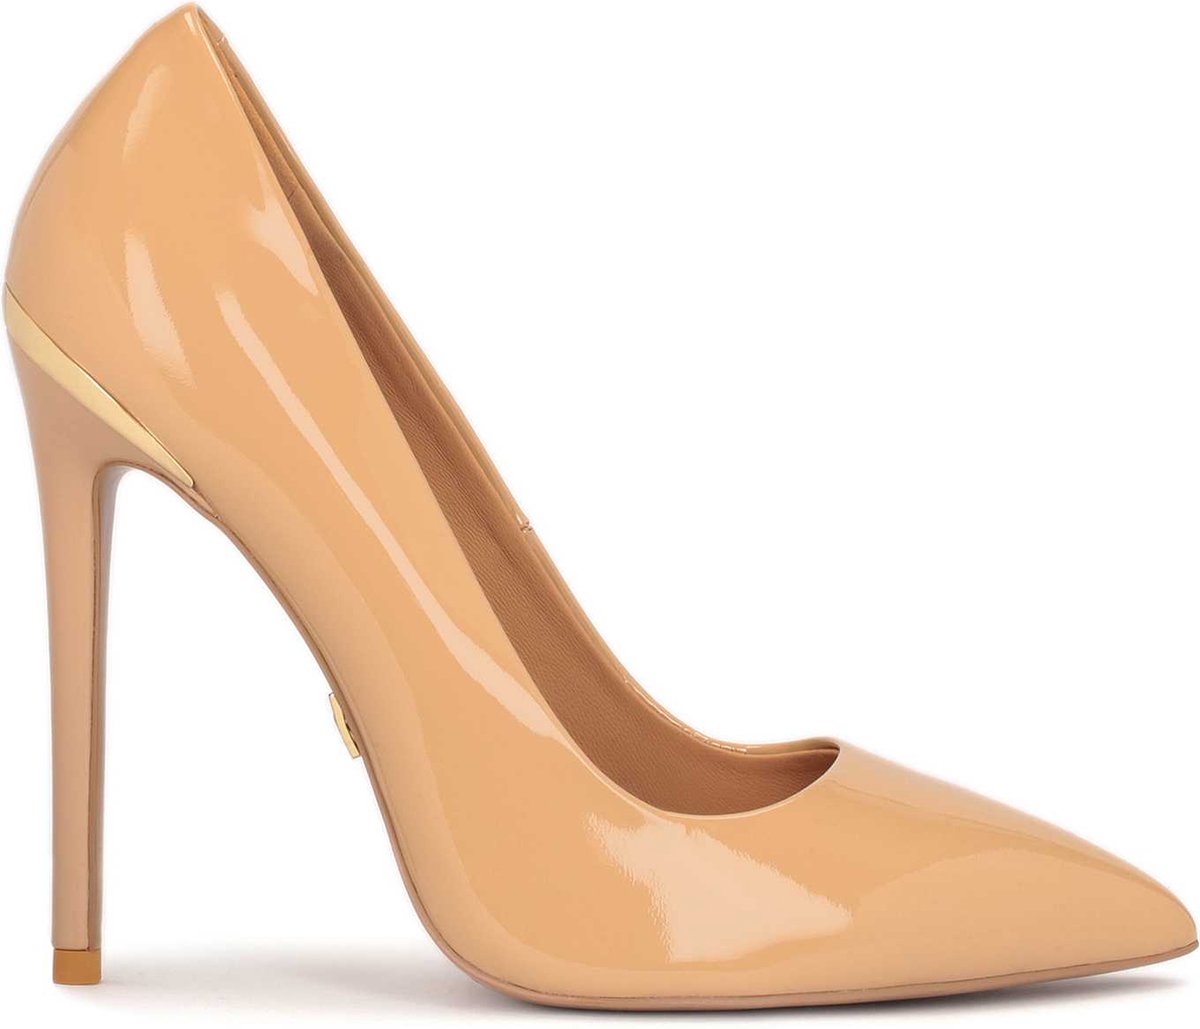 Kazar Brown lacquered pumps with a metal insert